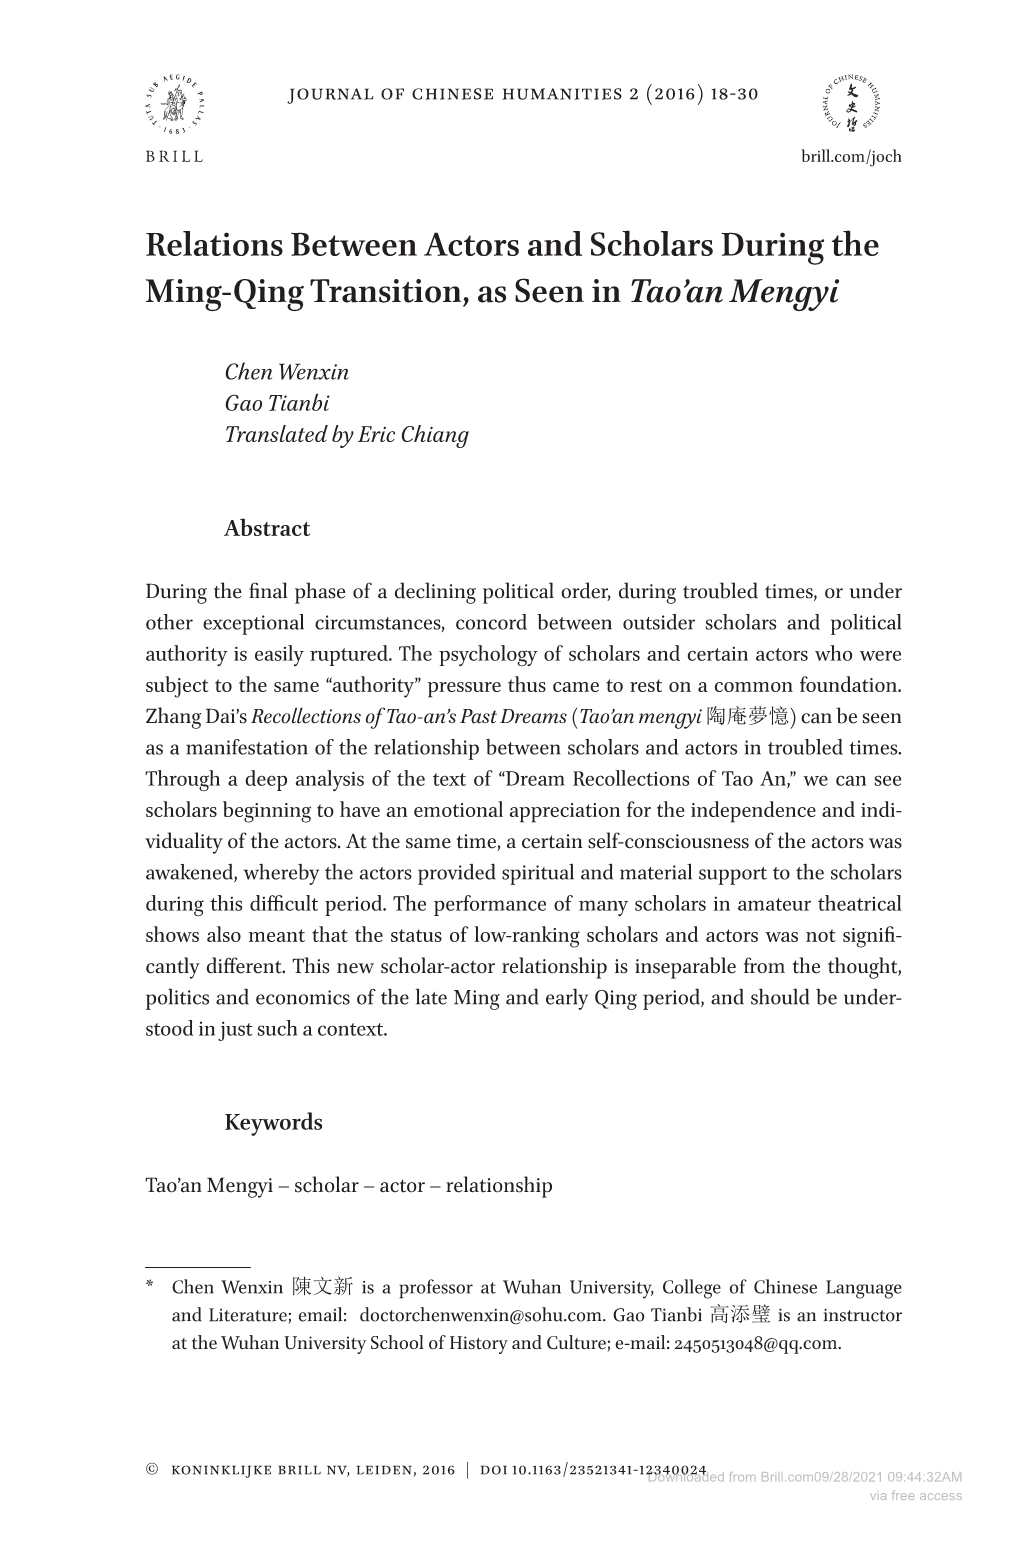 Relations Between Actors and Scholars During the Ming-Qing Transition, As Seen in Tao’An Mengyi